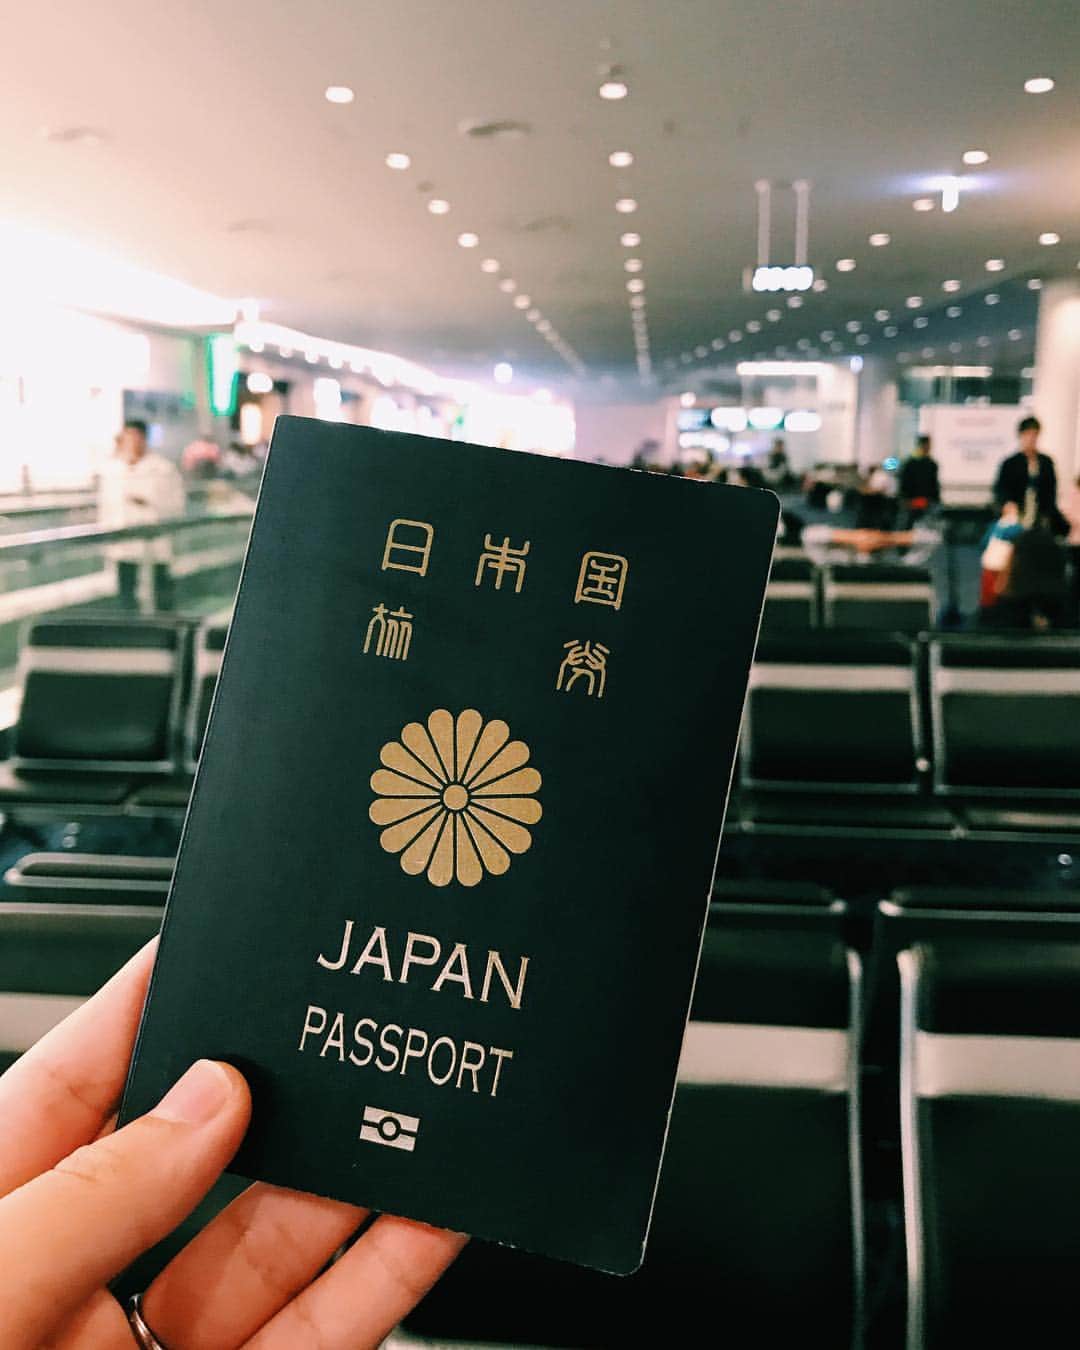 Risa Mizunoのインスタグラム：「After settled important works in Tokyo, I am off to Malaysia tonight! It has been almost 6 months here in Japan and I need Malaysia air to refresh my mind✨ I am still super excited in this airport departure moment even I have been to Malaysia so many times ❤️ Also because I miss my husband went back first few weeks ago due to his work 😂 Inshallah for the safe trip ✈️✨ #japanesemuslim #islam #muslim #muslimah #japanese #japan #tokyo #malaysia #muslimahtokyo  #travel #travellife #journey #hijab #tudung #日本人ムスリム #日本 #東京 #イスラーム #マレーシア #国際結婚 #🇲🇾 #❤️ #🇯🇵#ANA旅」